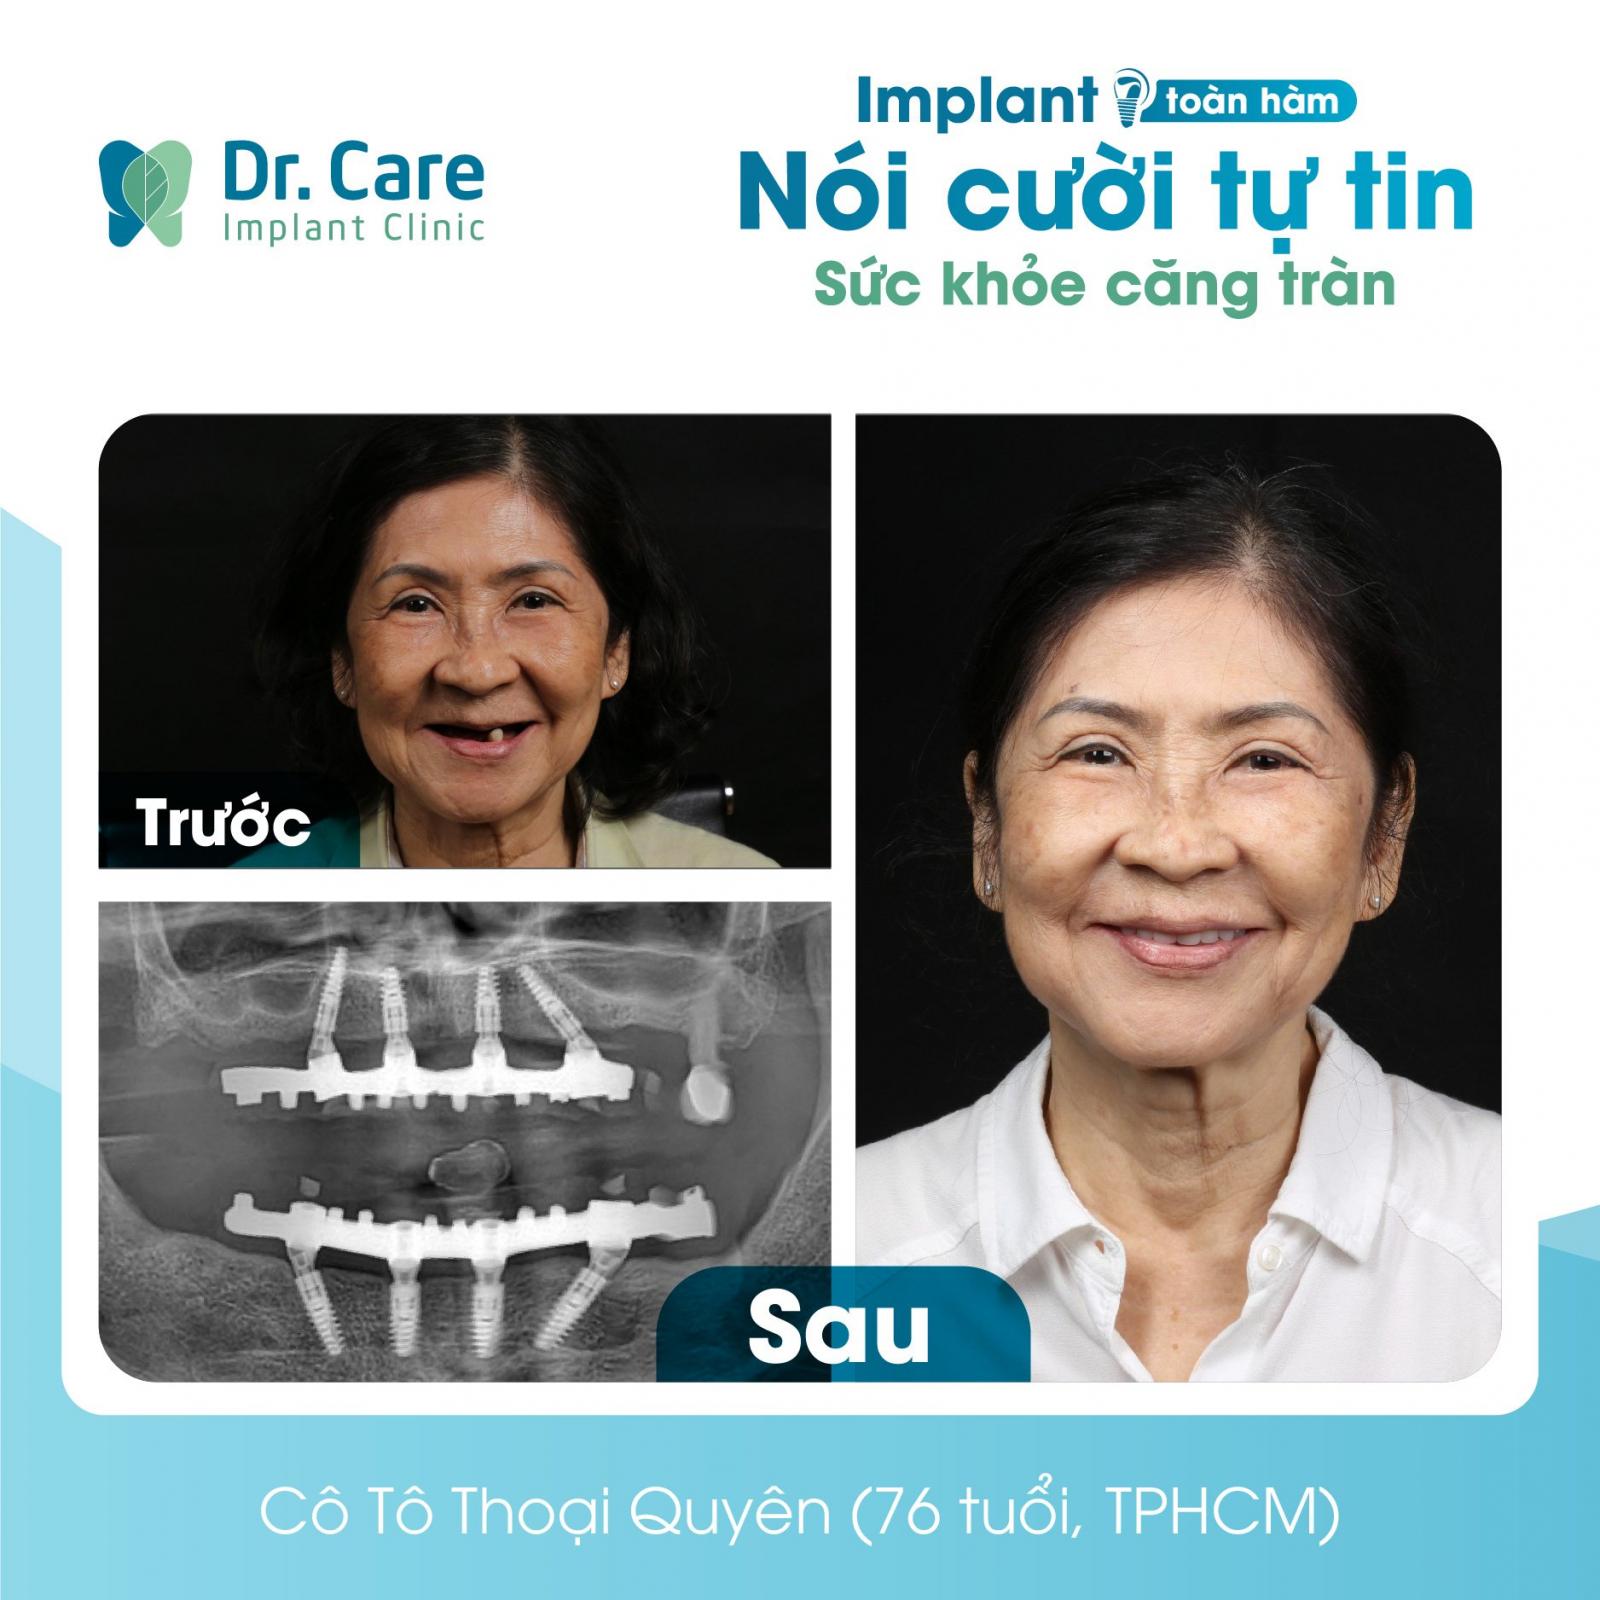  trồng Implant